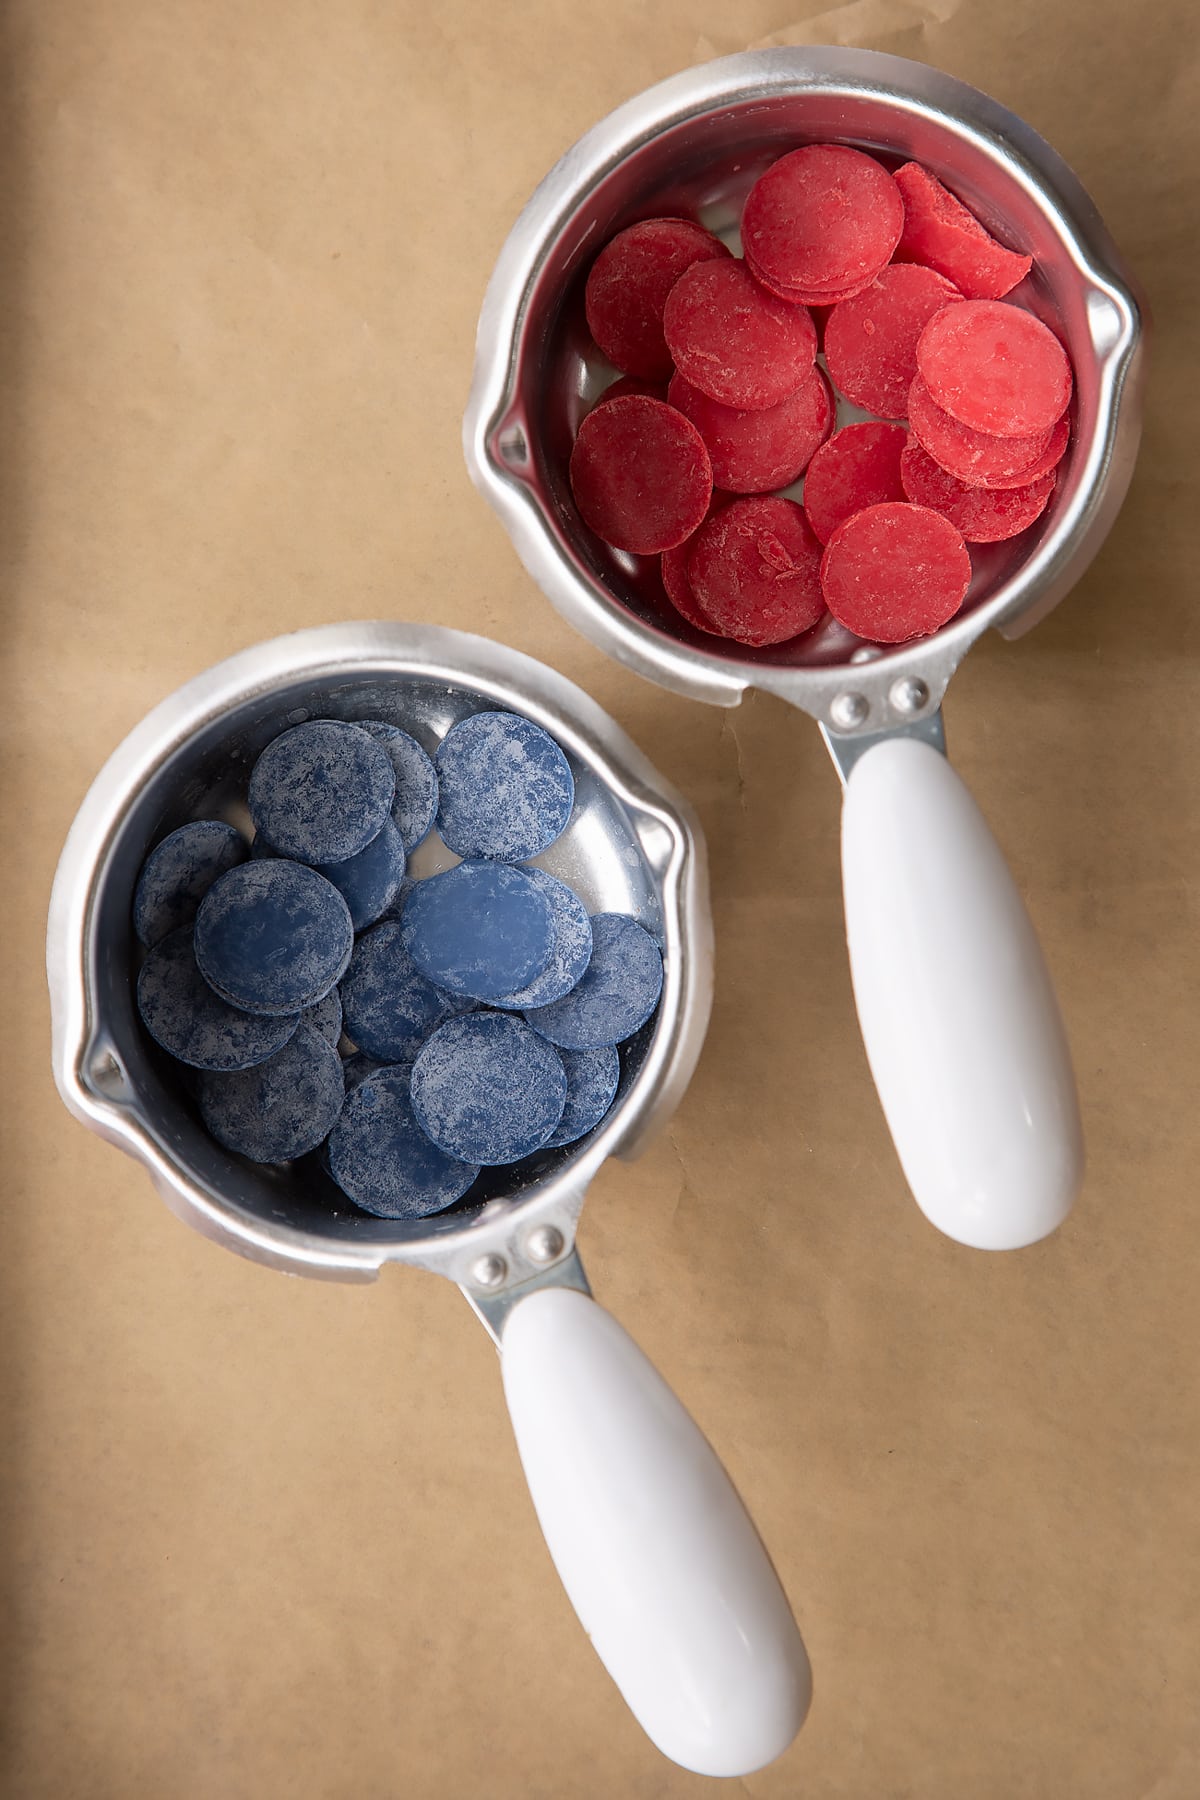 Blue candy and red candy in a small heatproof pan.